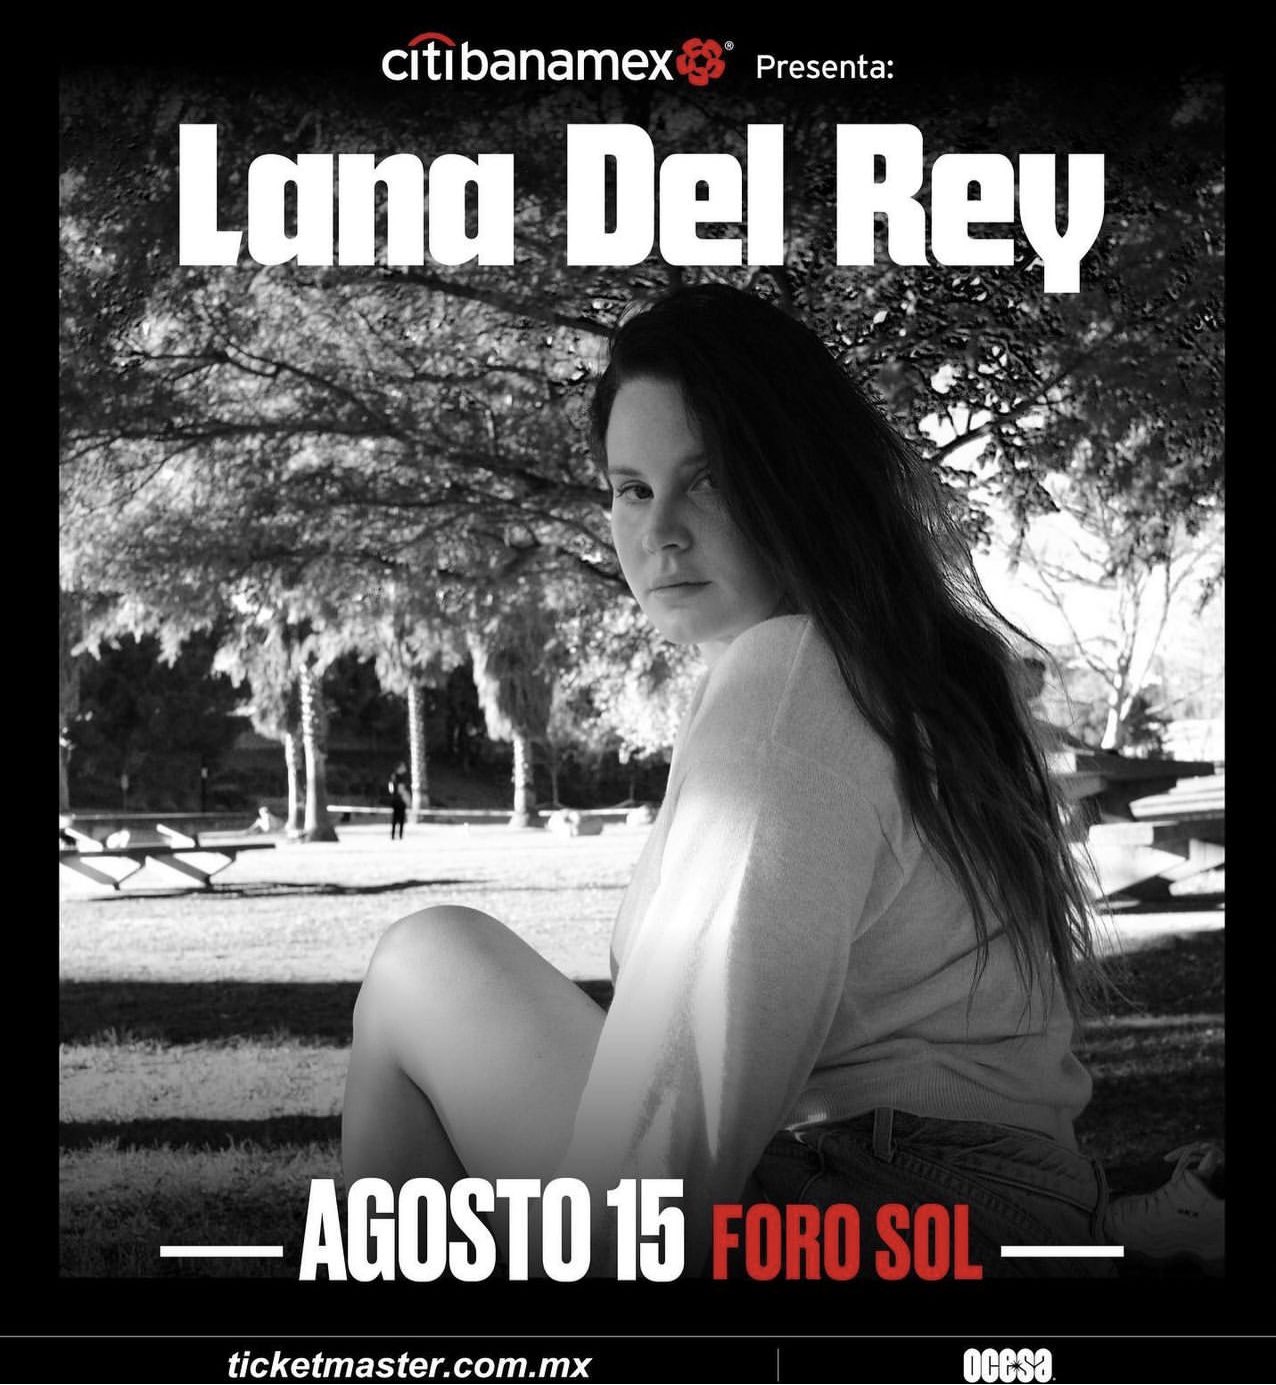 Lana Del Rey Online on Twitter: "Lana Del Rey will be performing in Mexico  City, MX at Foro Sol on August 15! https://t.co/F1j9Z6d0oc" / X